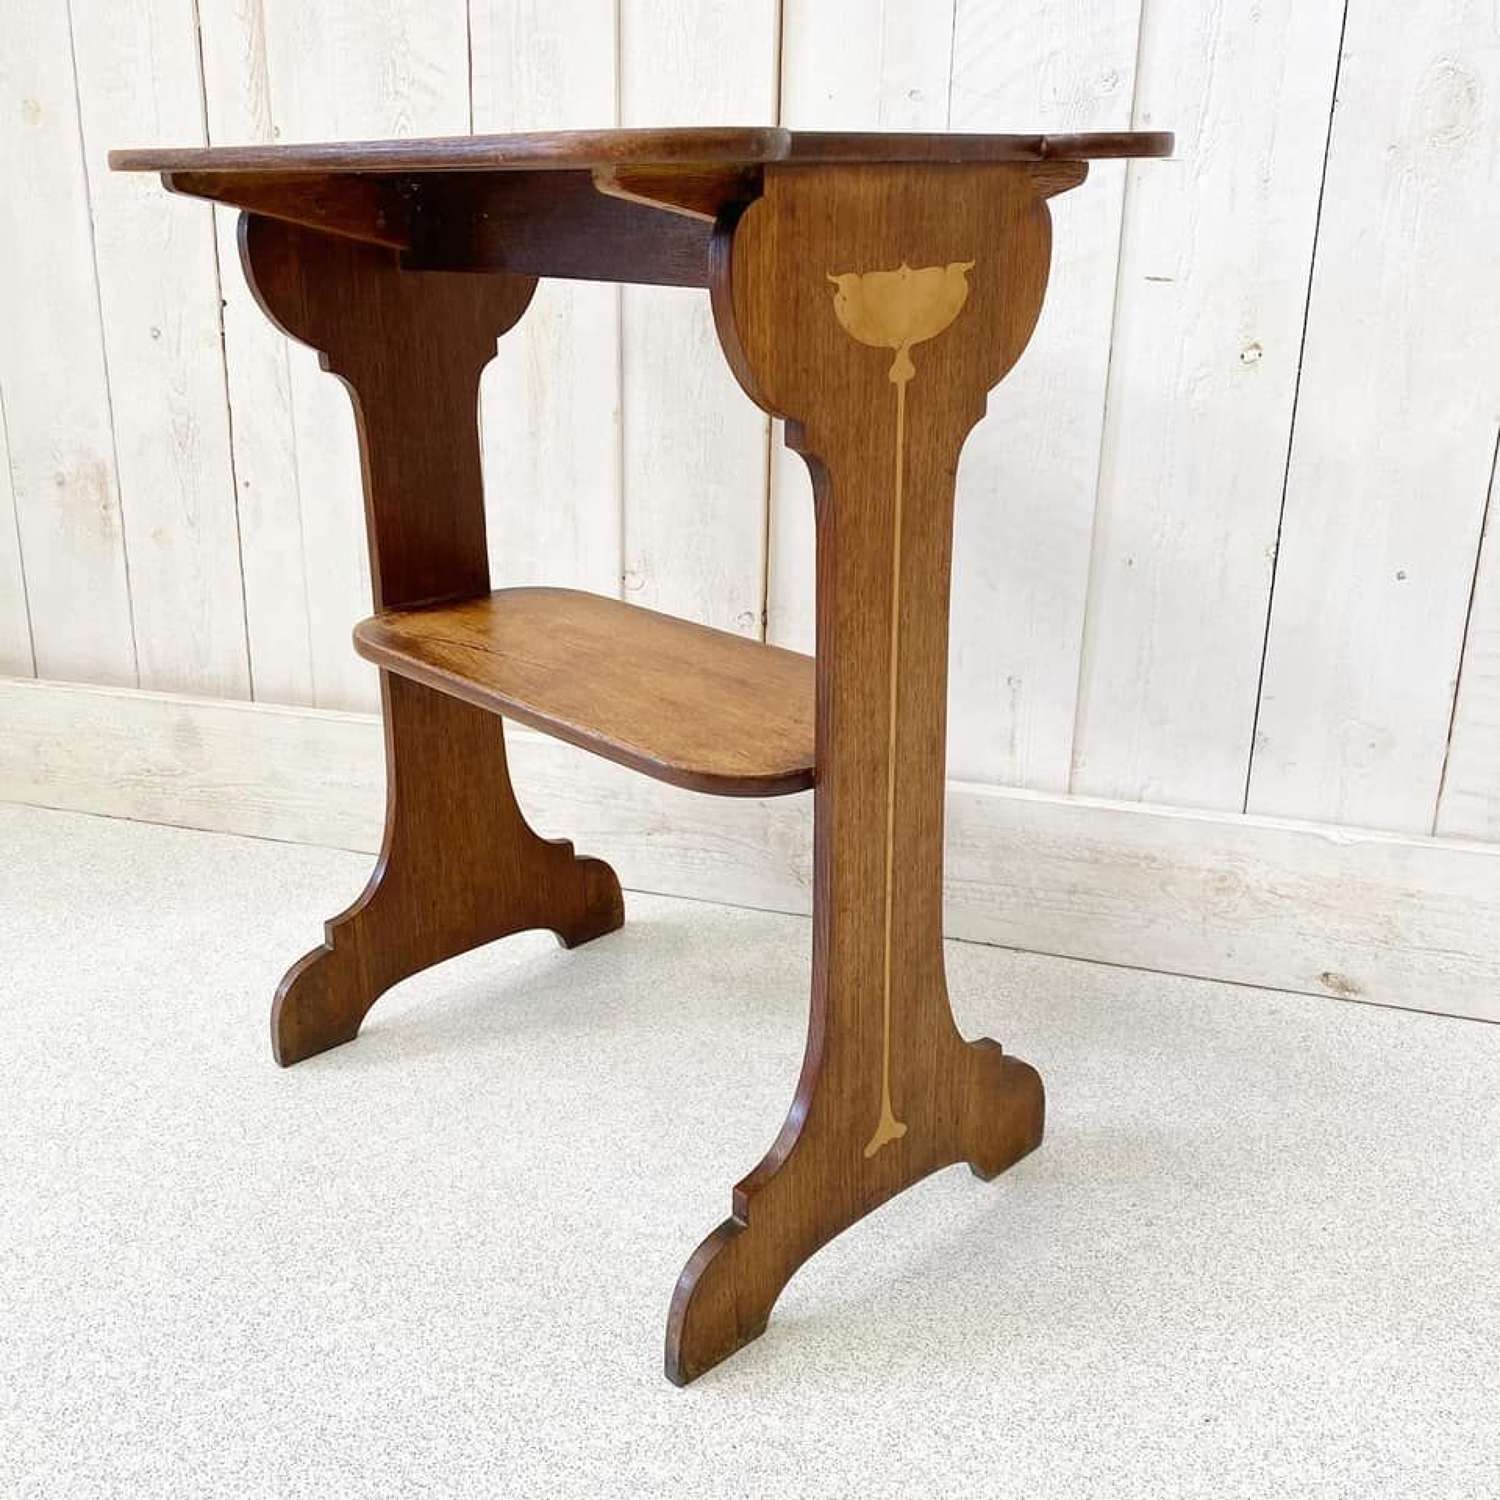 Scottish Arts and Crafts Side Table